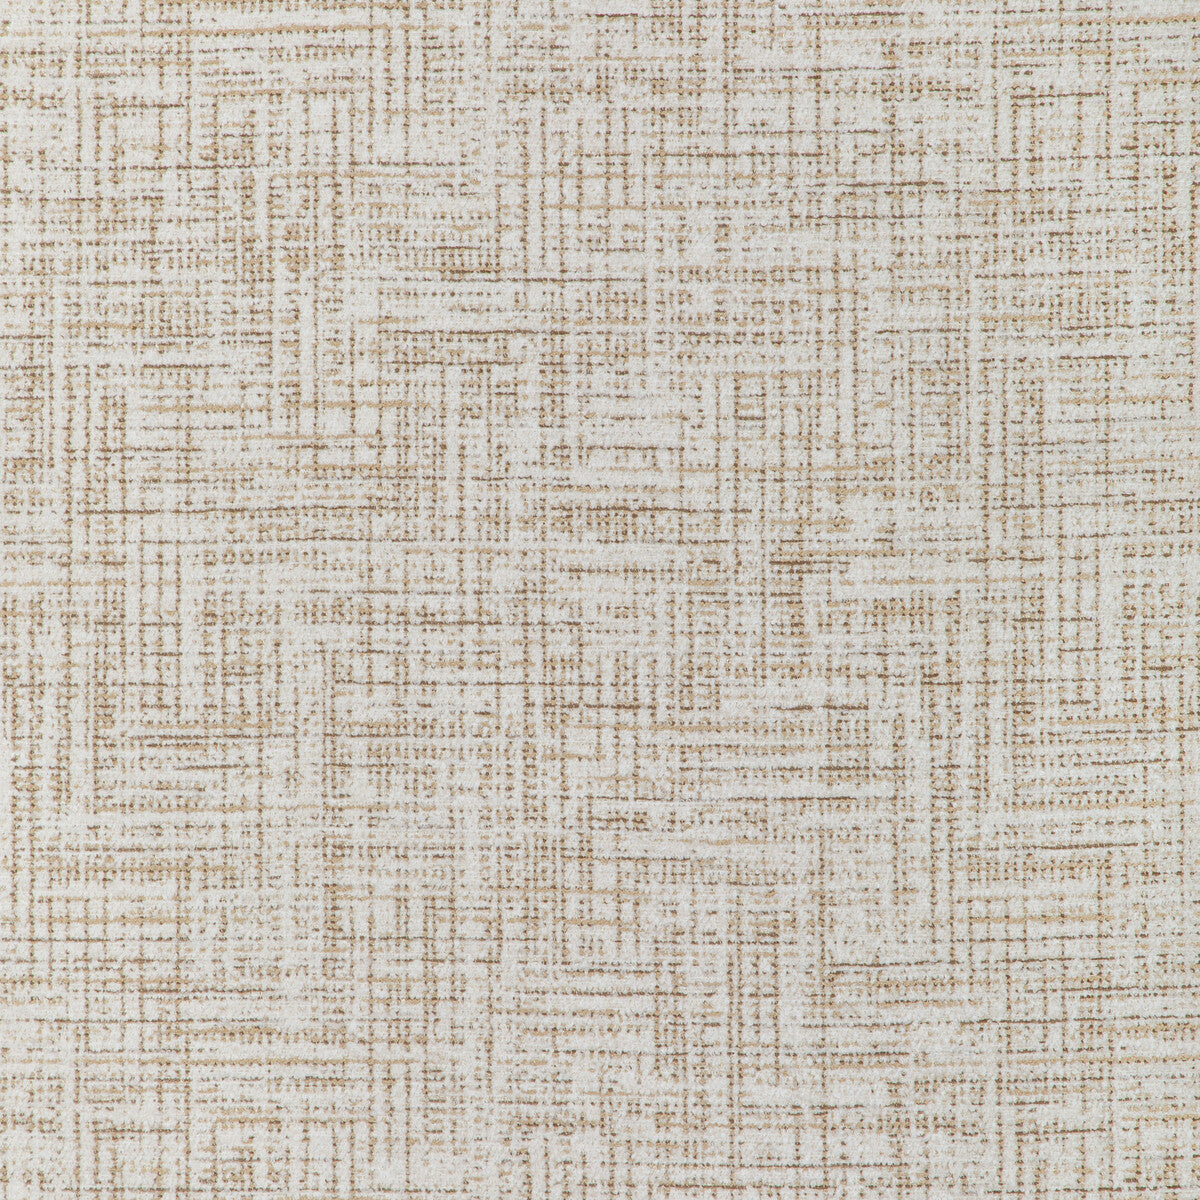 Kravet Design fabric in 37218-116 color - pattern 37218.116.0 - by Kravet Design in the Woven Colors collection